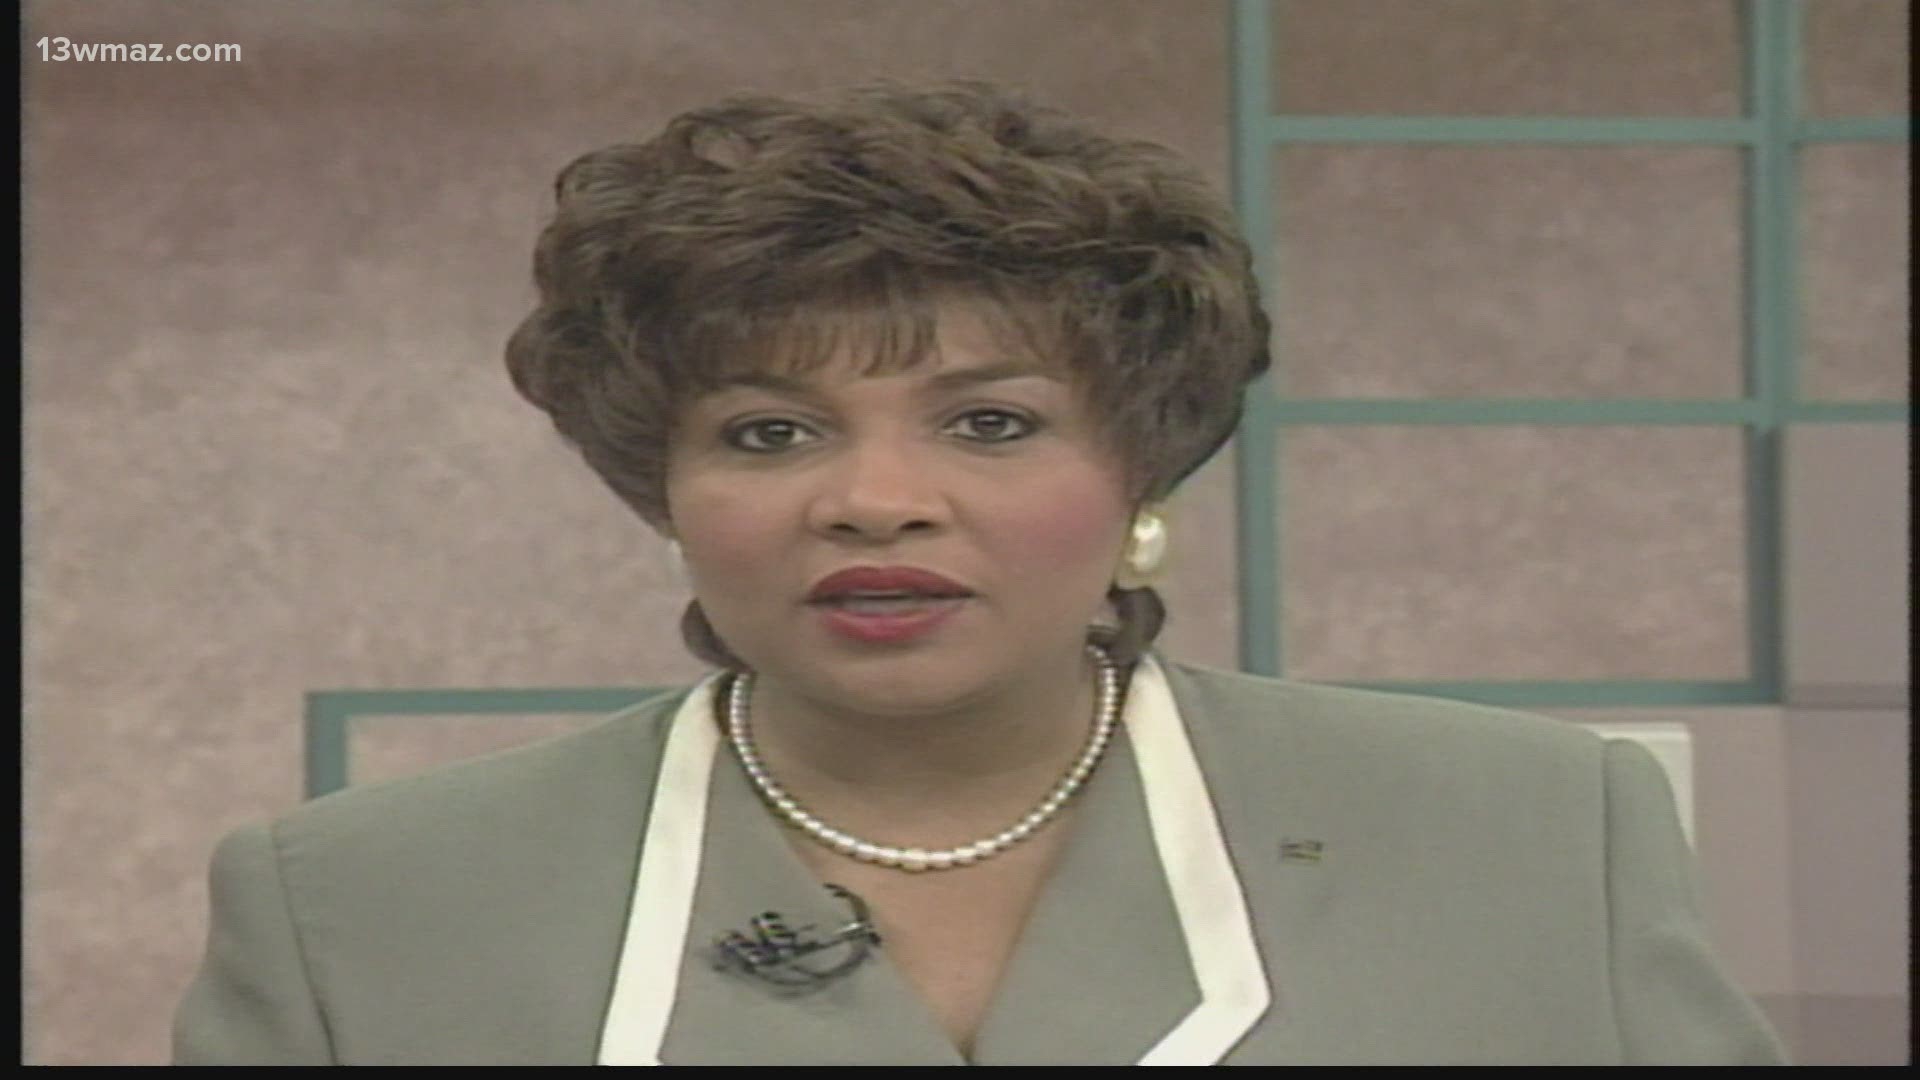 A 13WMAZ legend and former anchor has died. Tina Hicks had a nearly 30-year run on 13WMAZ, serving as the first African-American to anchor here at the station.